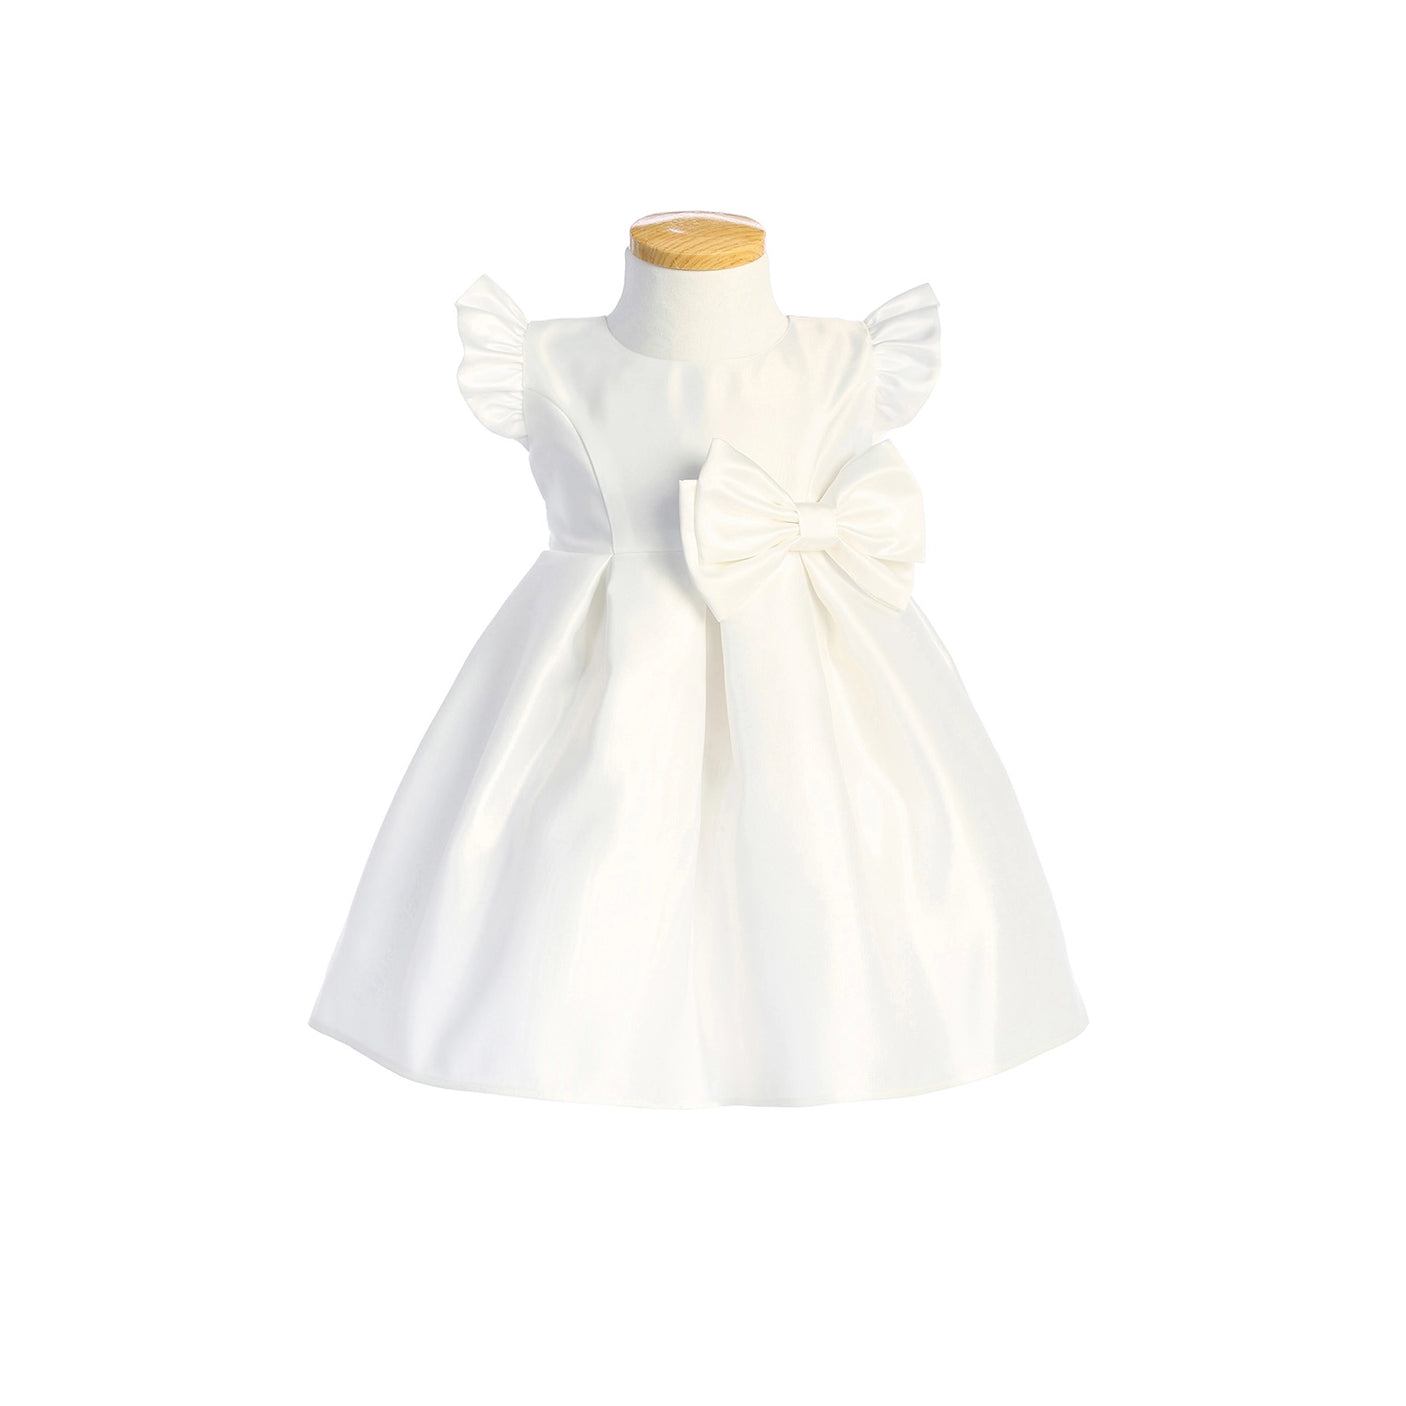 Satin pleated flutter sleeve with bow detail.